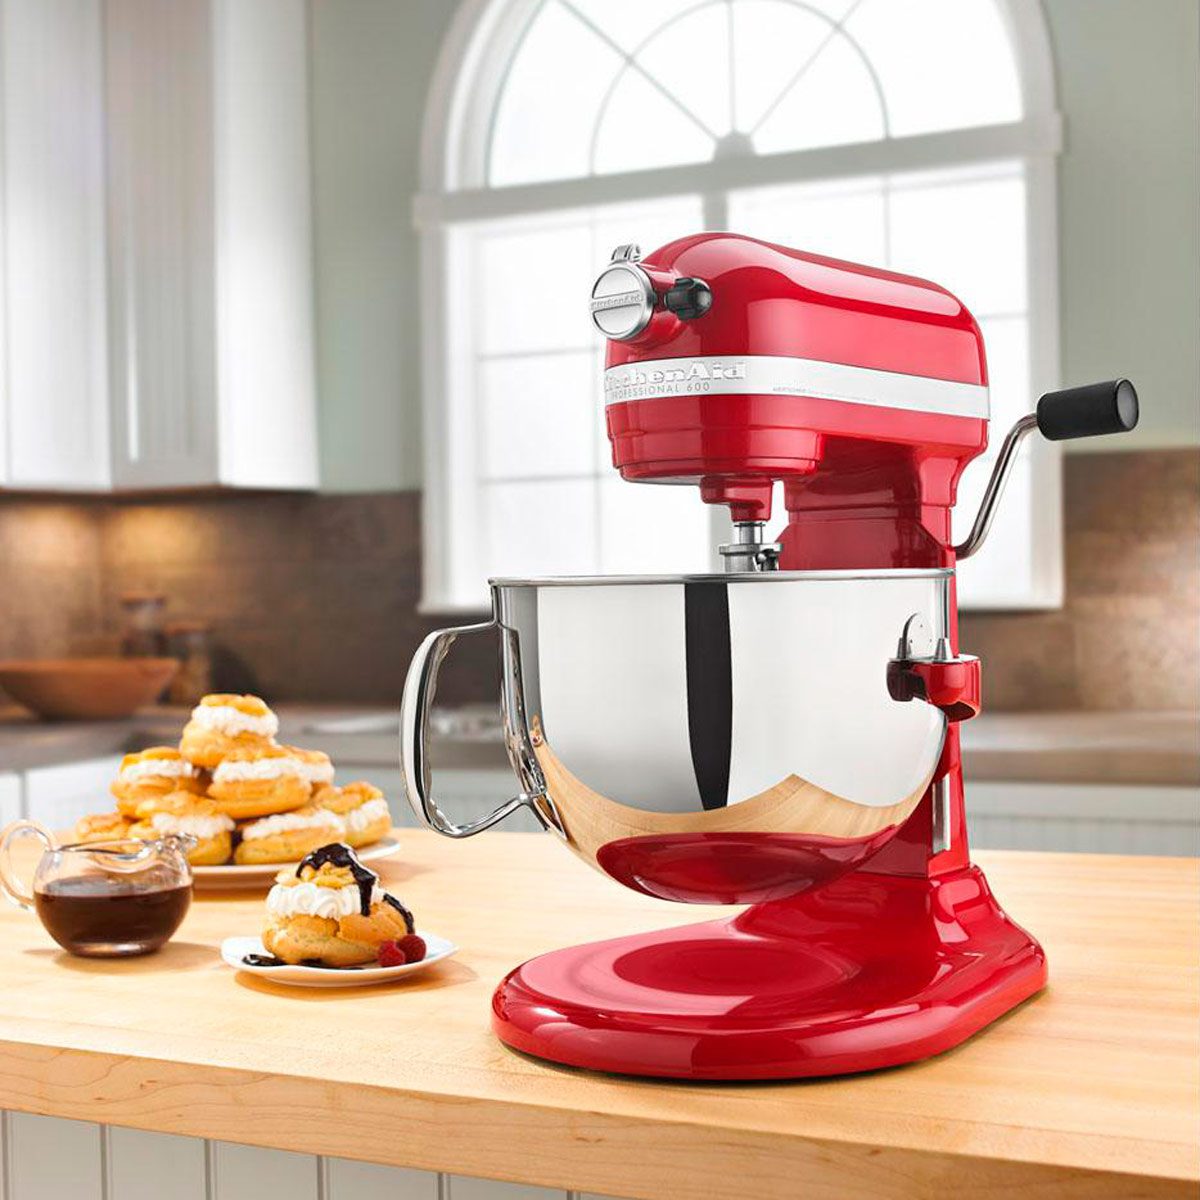 Is Your KitchenAid Mixer Leaking Oil? Here's What to Do.